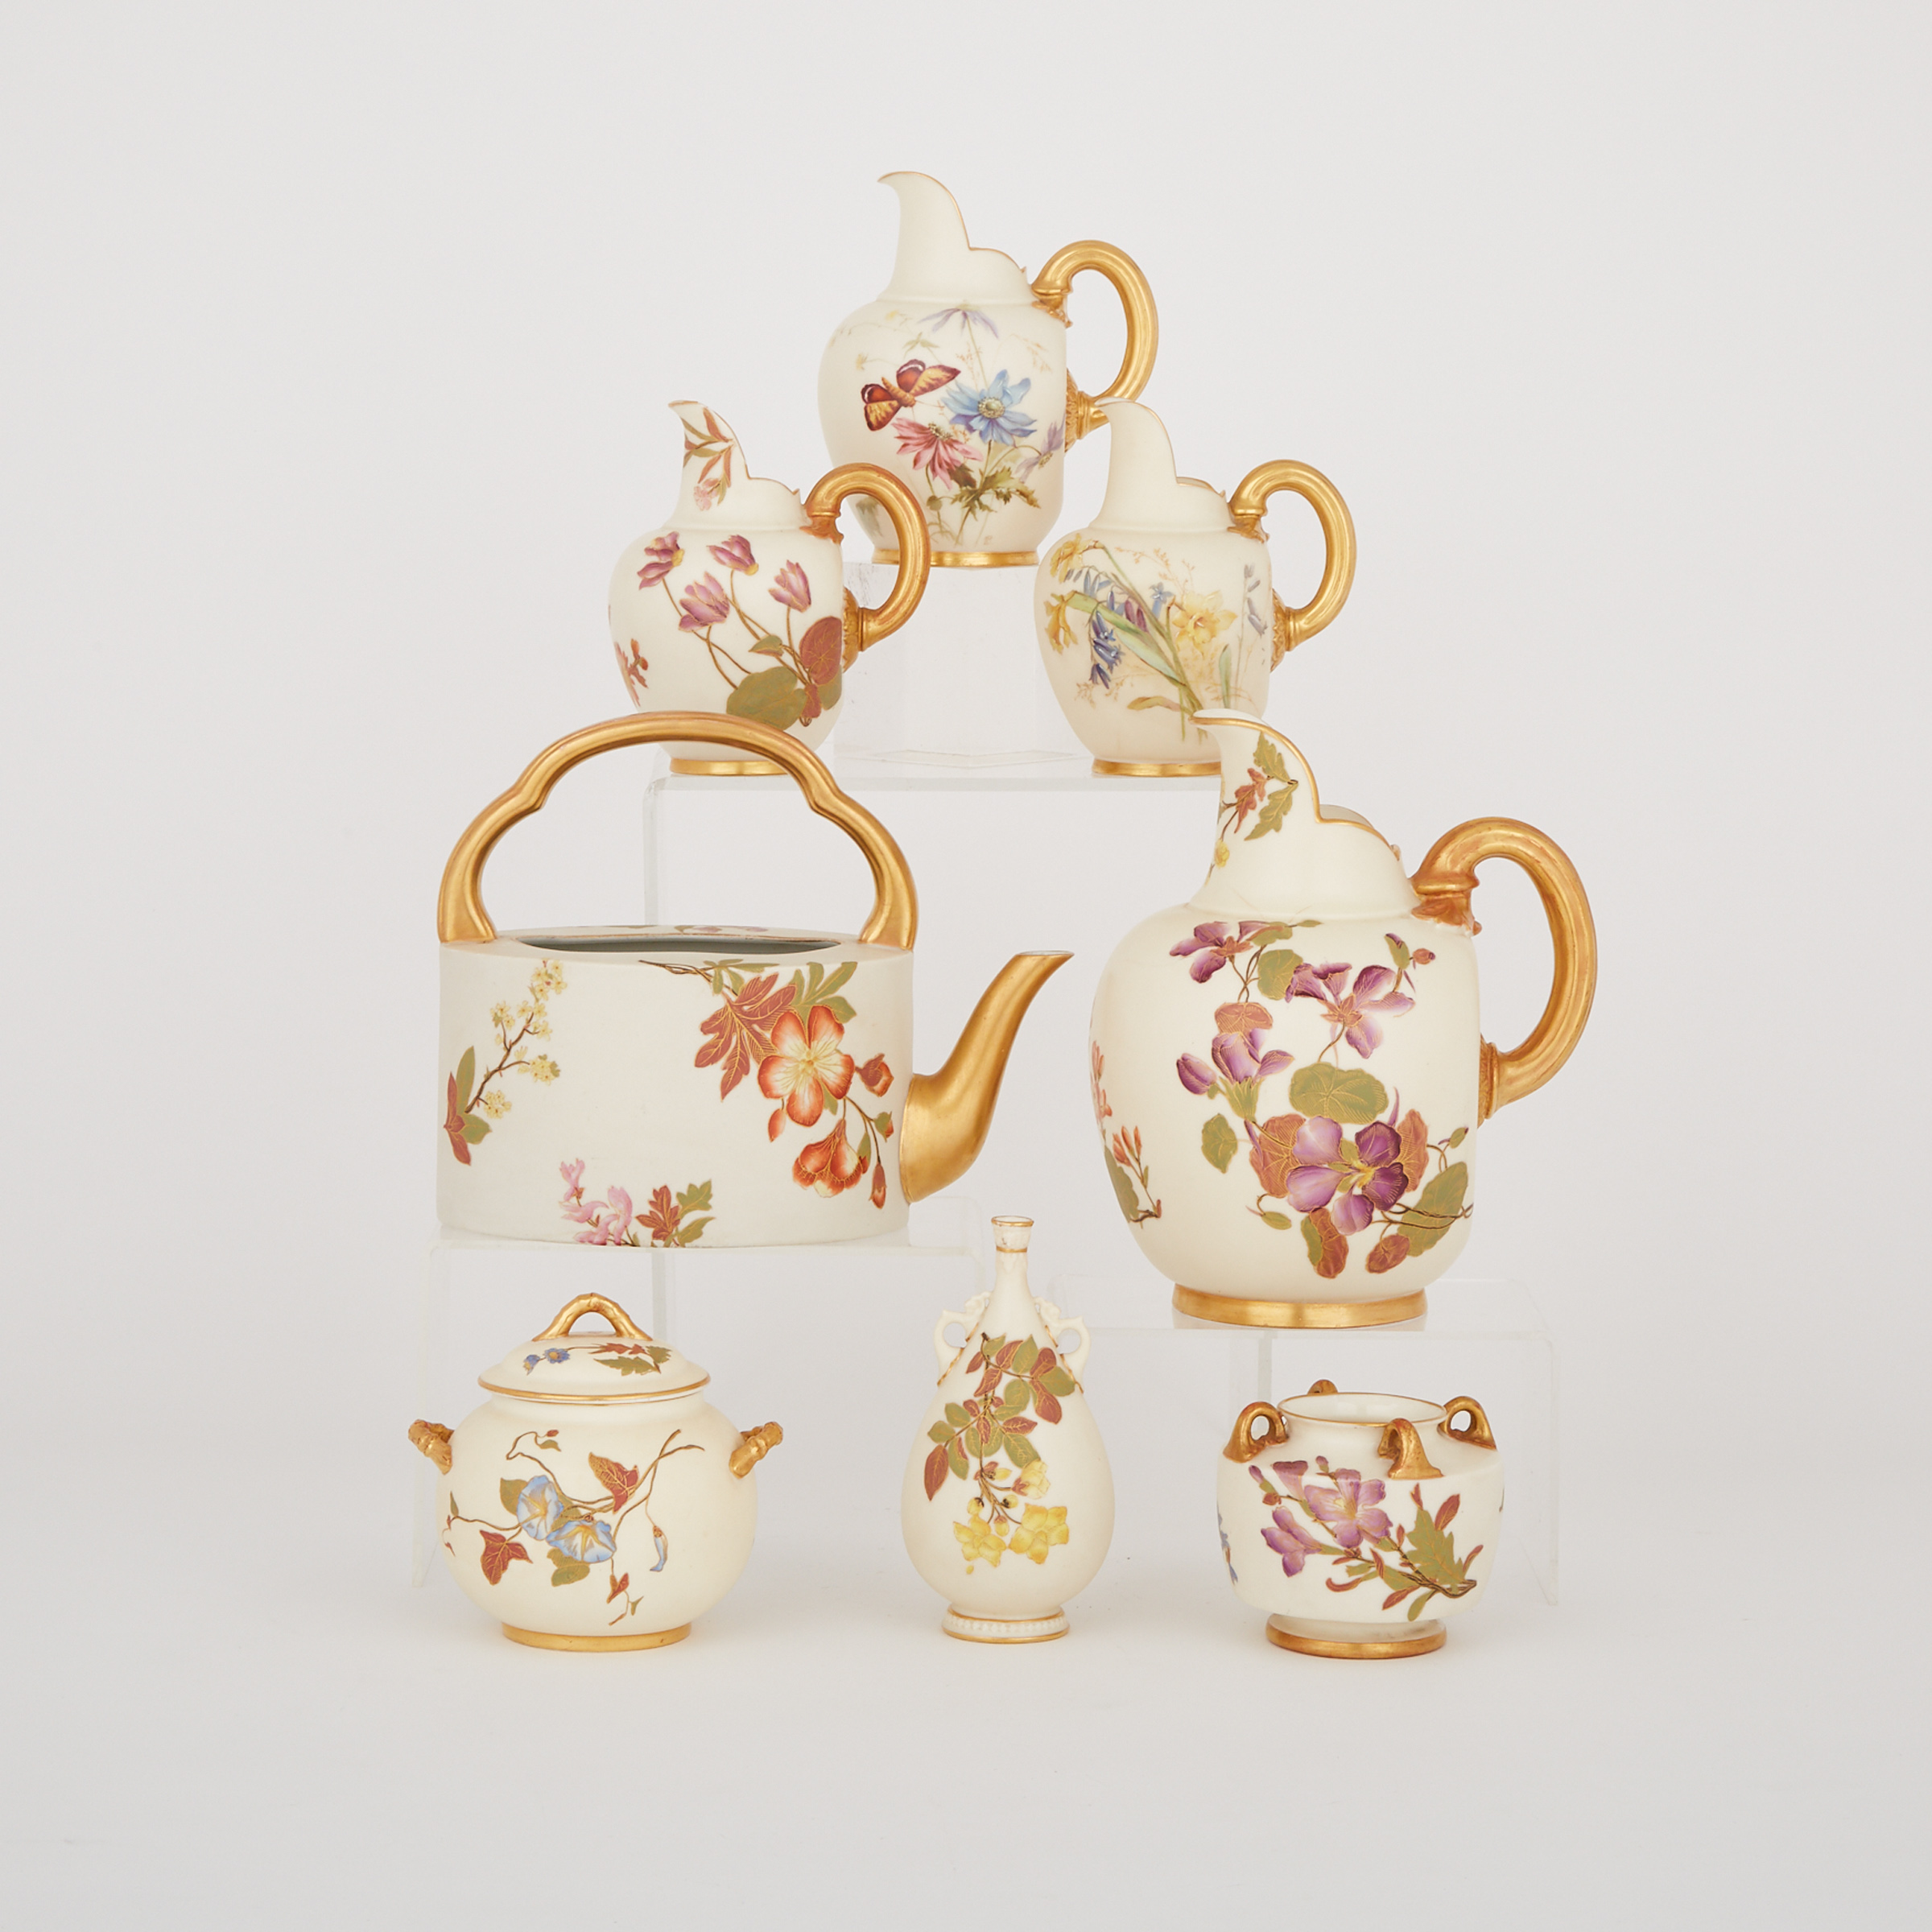 Group of Royal Worcester Floral and Gilt Decorated Articles, c.1887-93